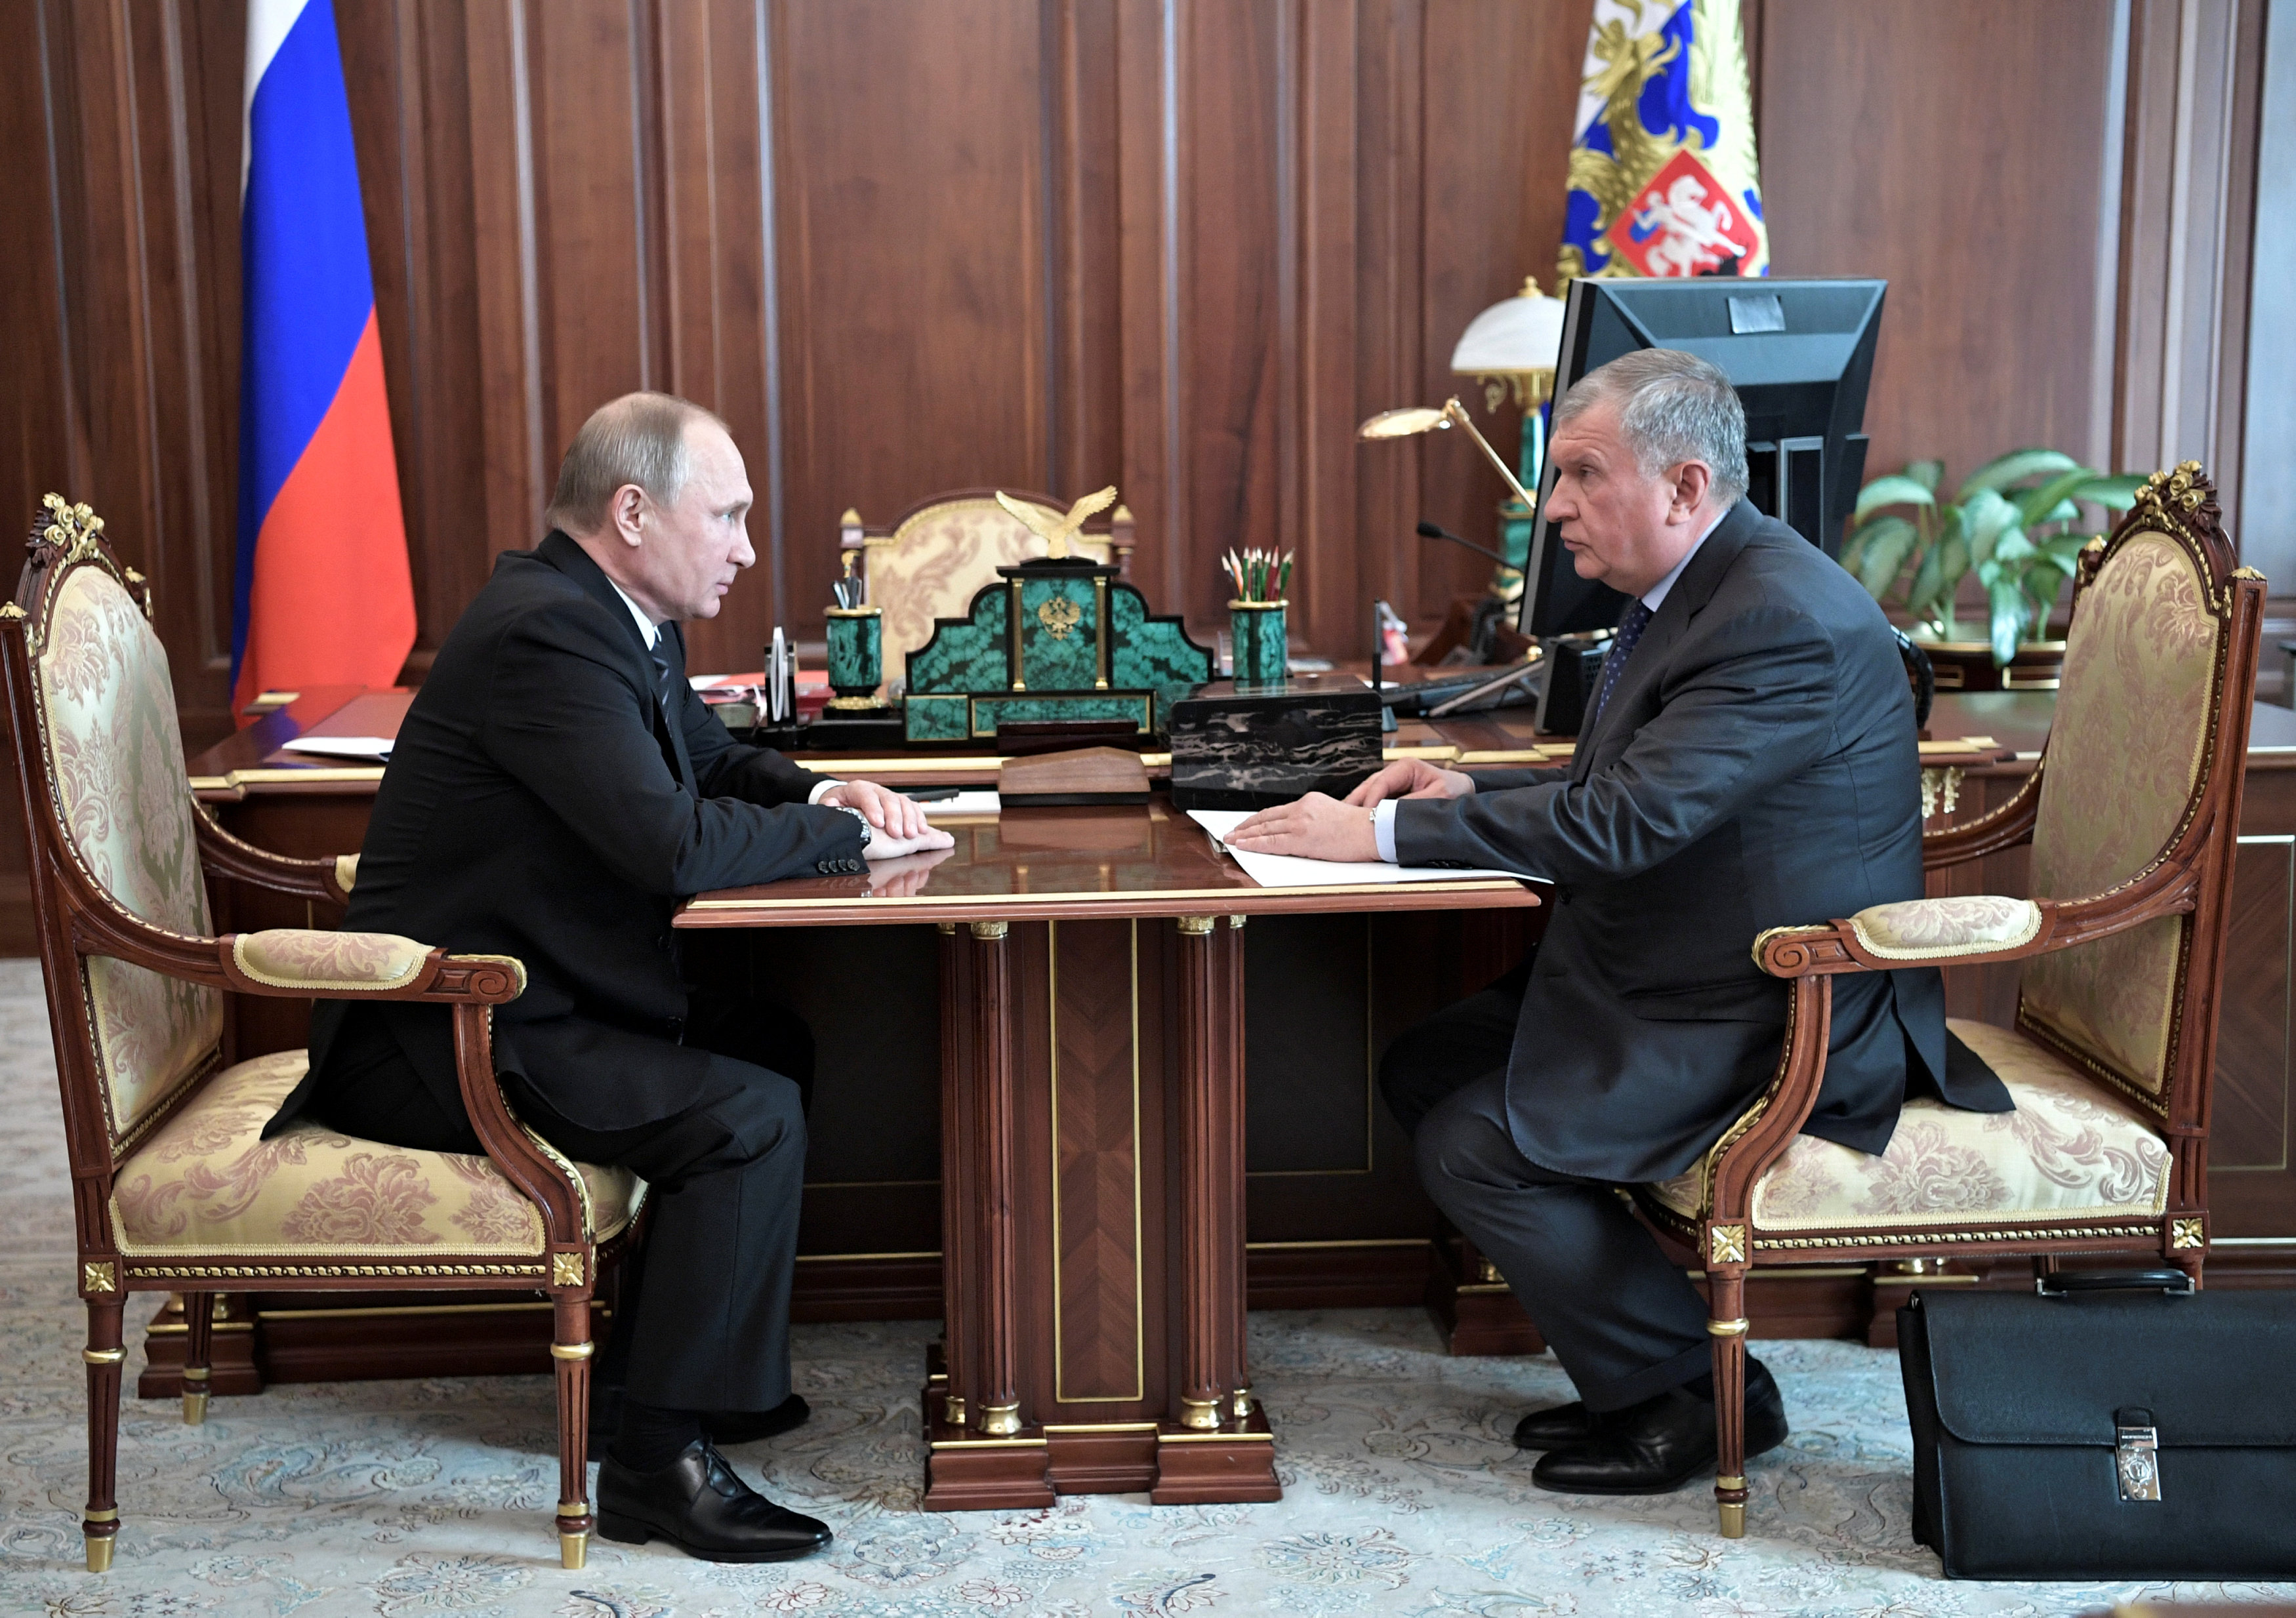 Russian President Vladimir Putin meets with Rosneft Chief Executive Igor Sechin at the Kremlin in Moscow, Russia, June 20, 2017. Sputnik/Alexei Nikolsky/Kremlin via REUTERS ATTENTION EDITORS - THIS IMAGE WAS PROVIDED BY A THIRD PARTY.